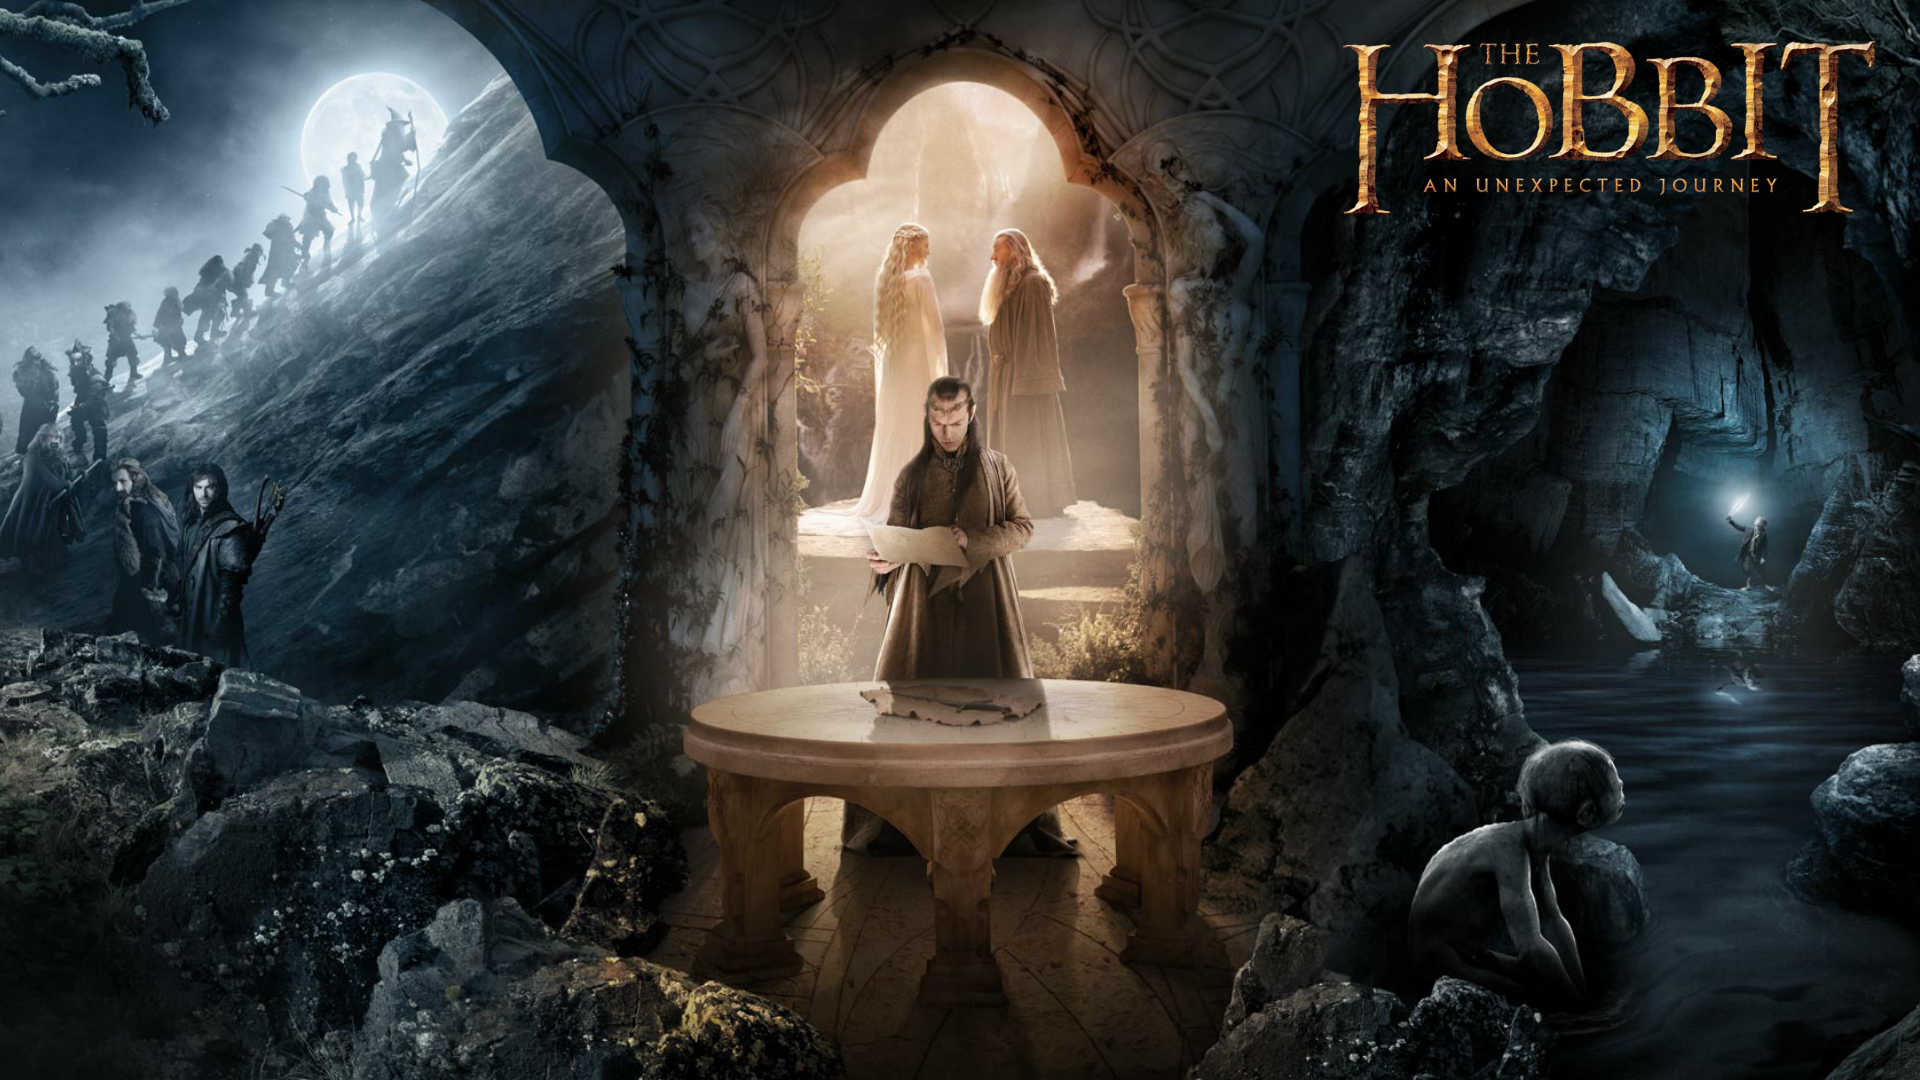 The Hobbit The Battle Of The Five Armies Dual The Hobbit wallpaper  Movies The Hobbit Gandalf bilbo baggins Bard th  The hobbit Wallpaper The  hobbit movies